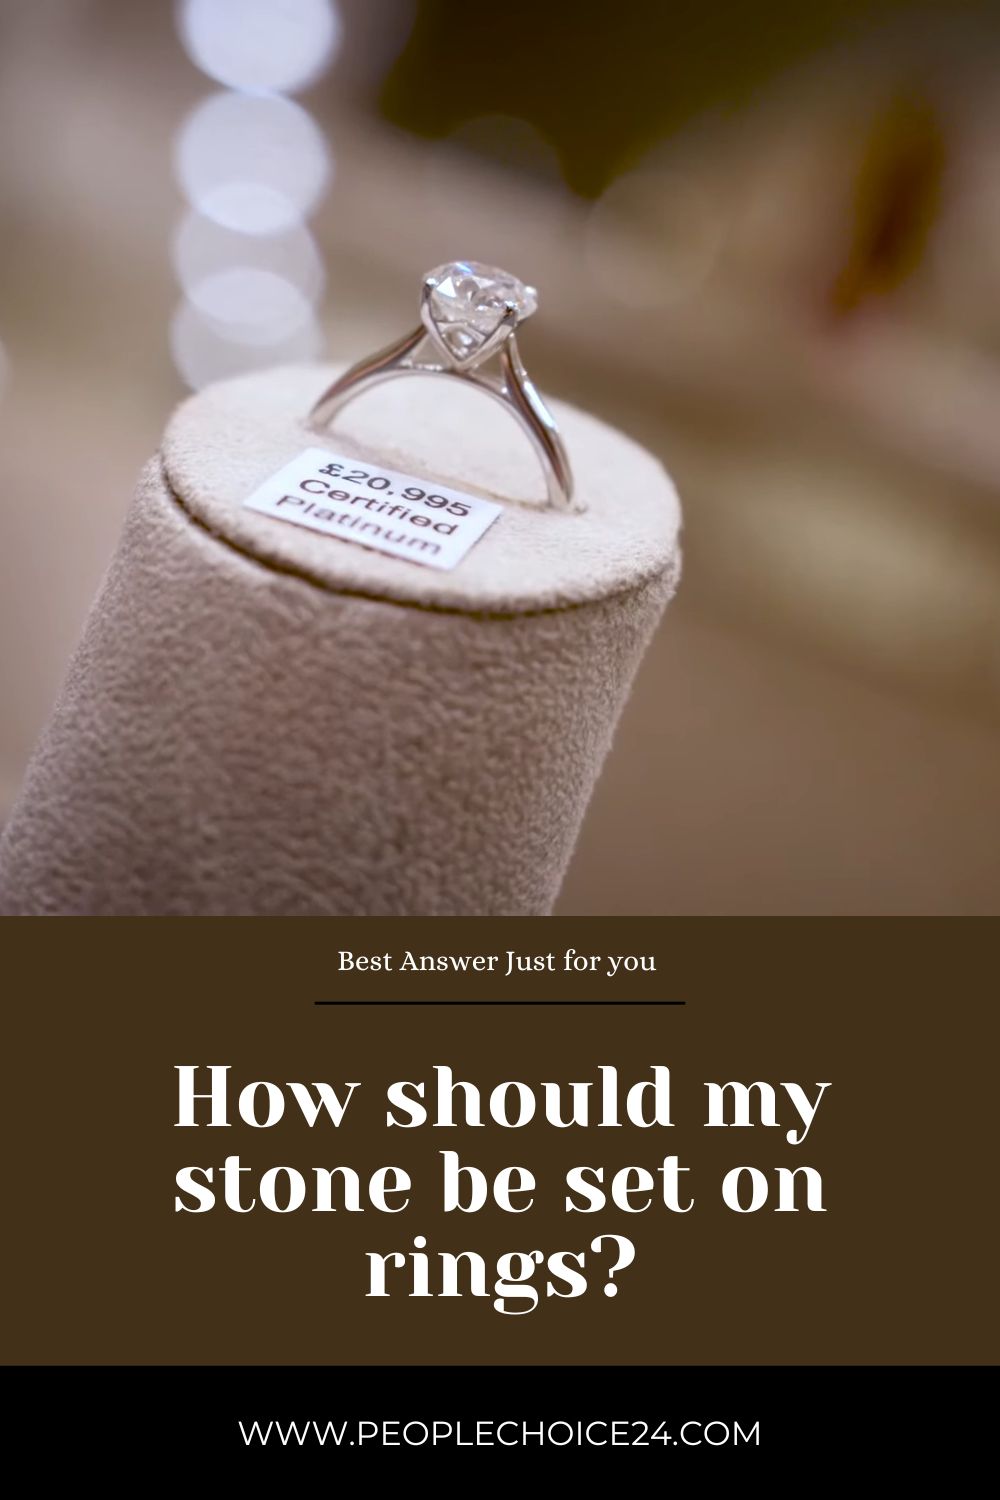 How should my stone be set on rings